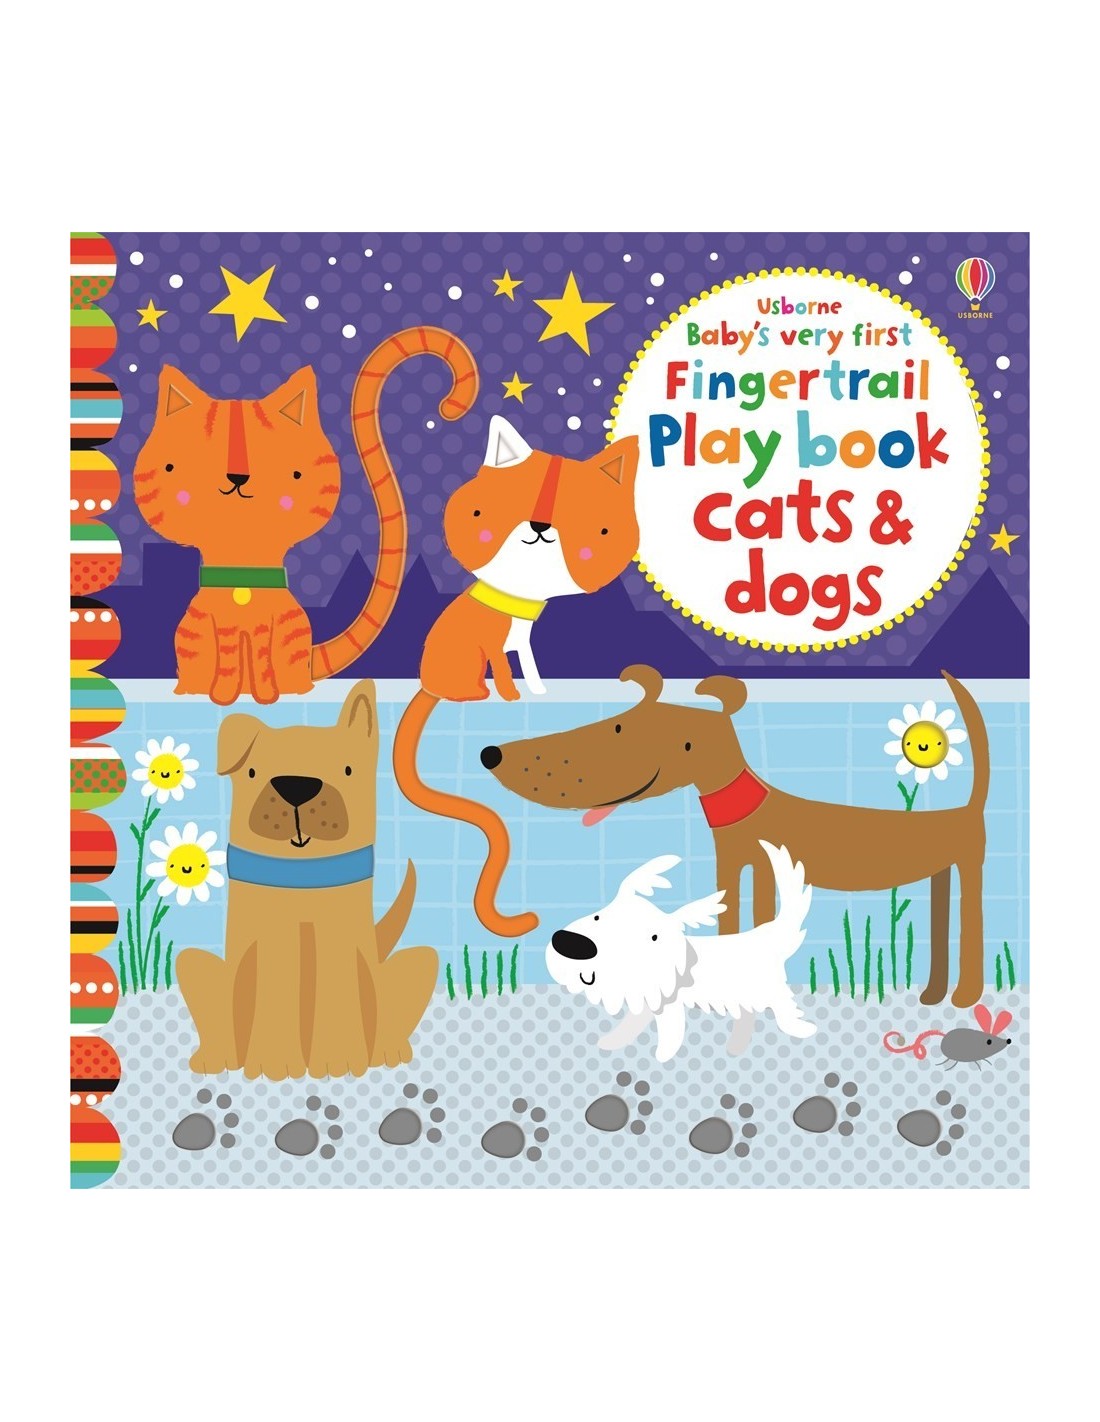 Baby's very first fingertrail play book cats and dogs